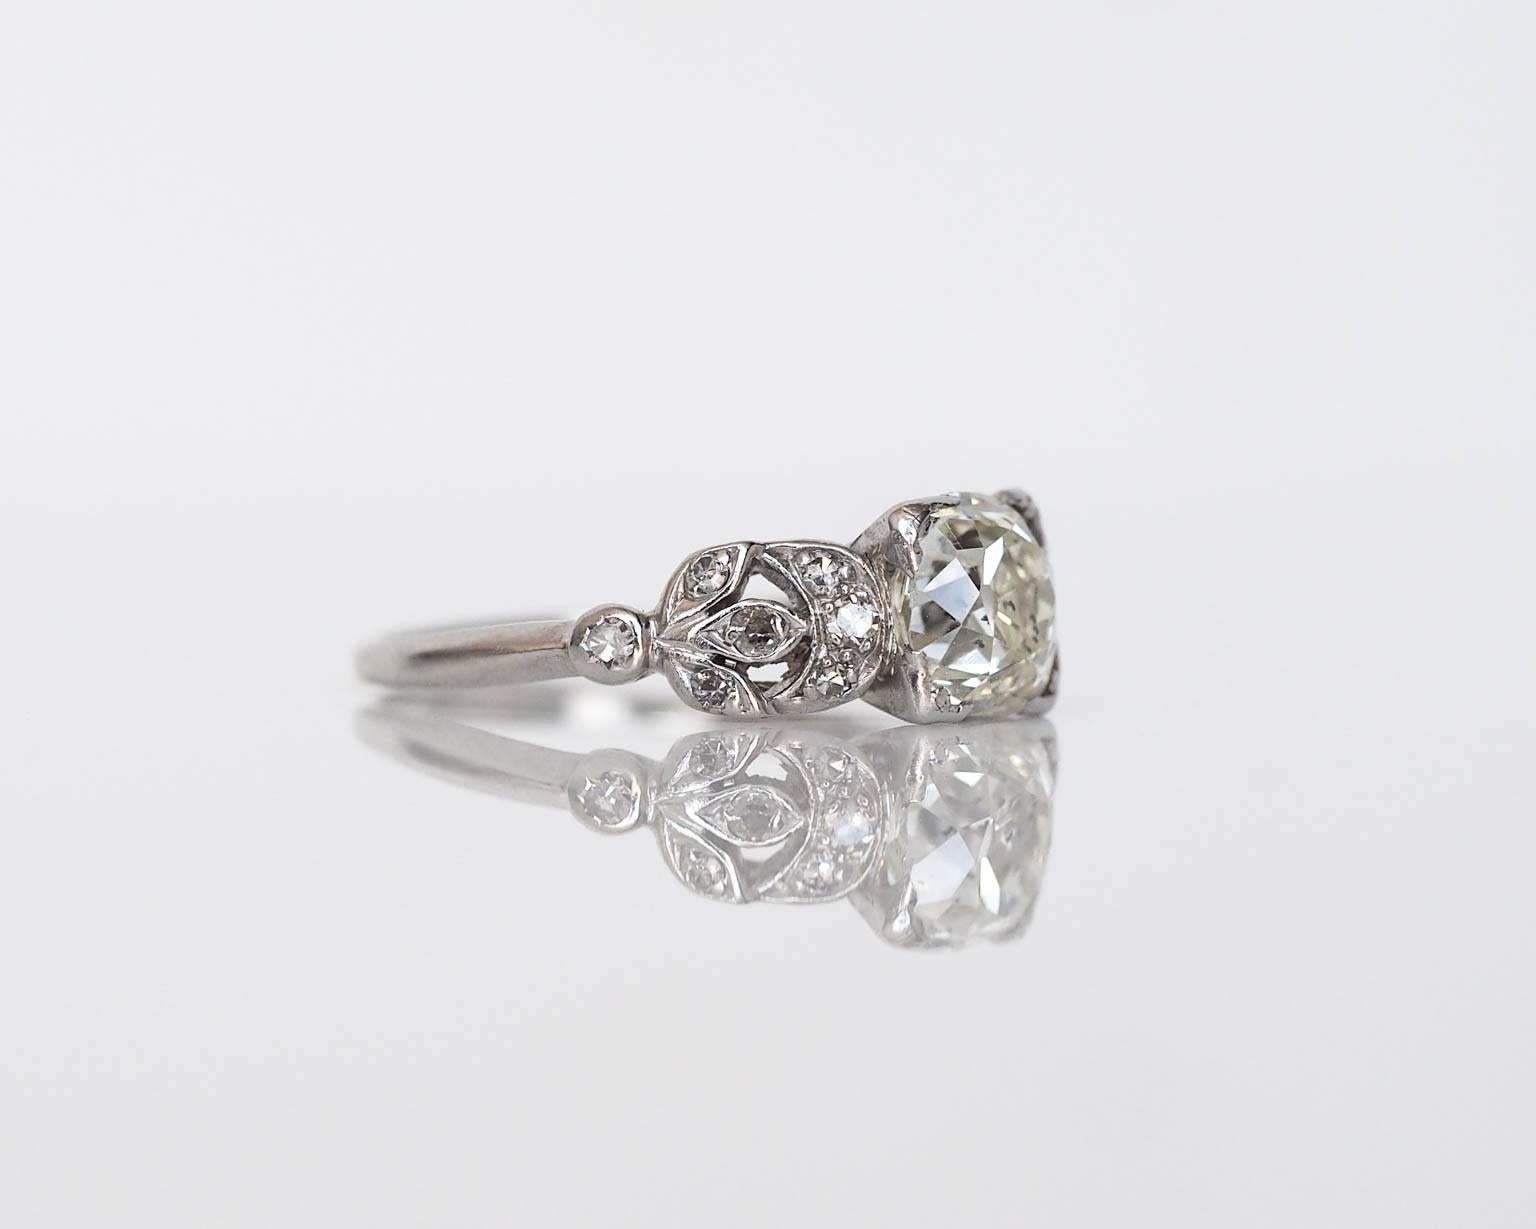 Here we have a classic and timeless style. The center stone is a 1.60ct Old Cushion Brilliant Cut diamond with an amazing fire. The old cushion center stone has an amazing look, with a very large culet which you can see looking face up and it just